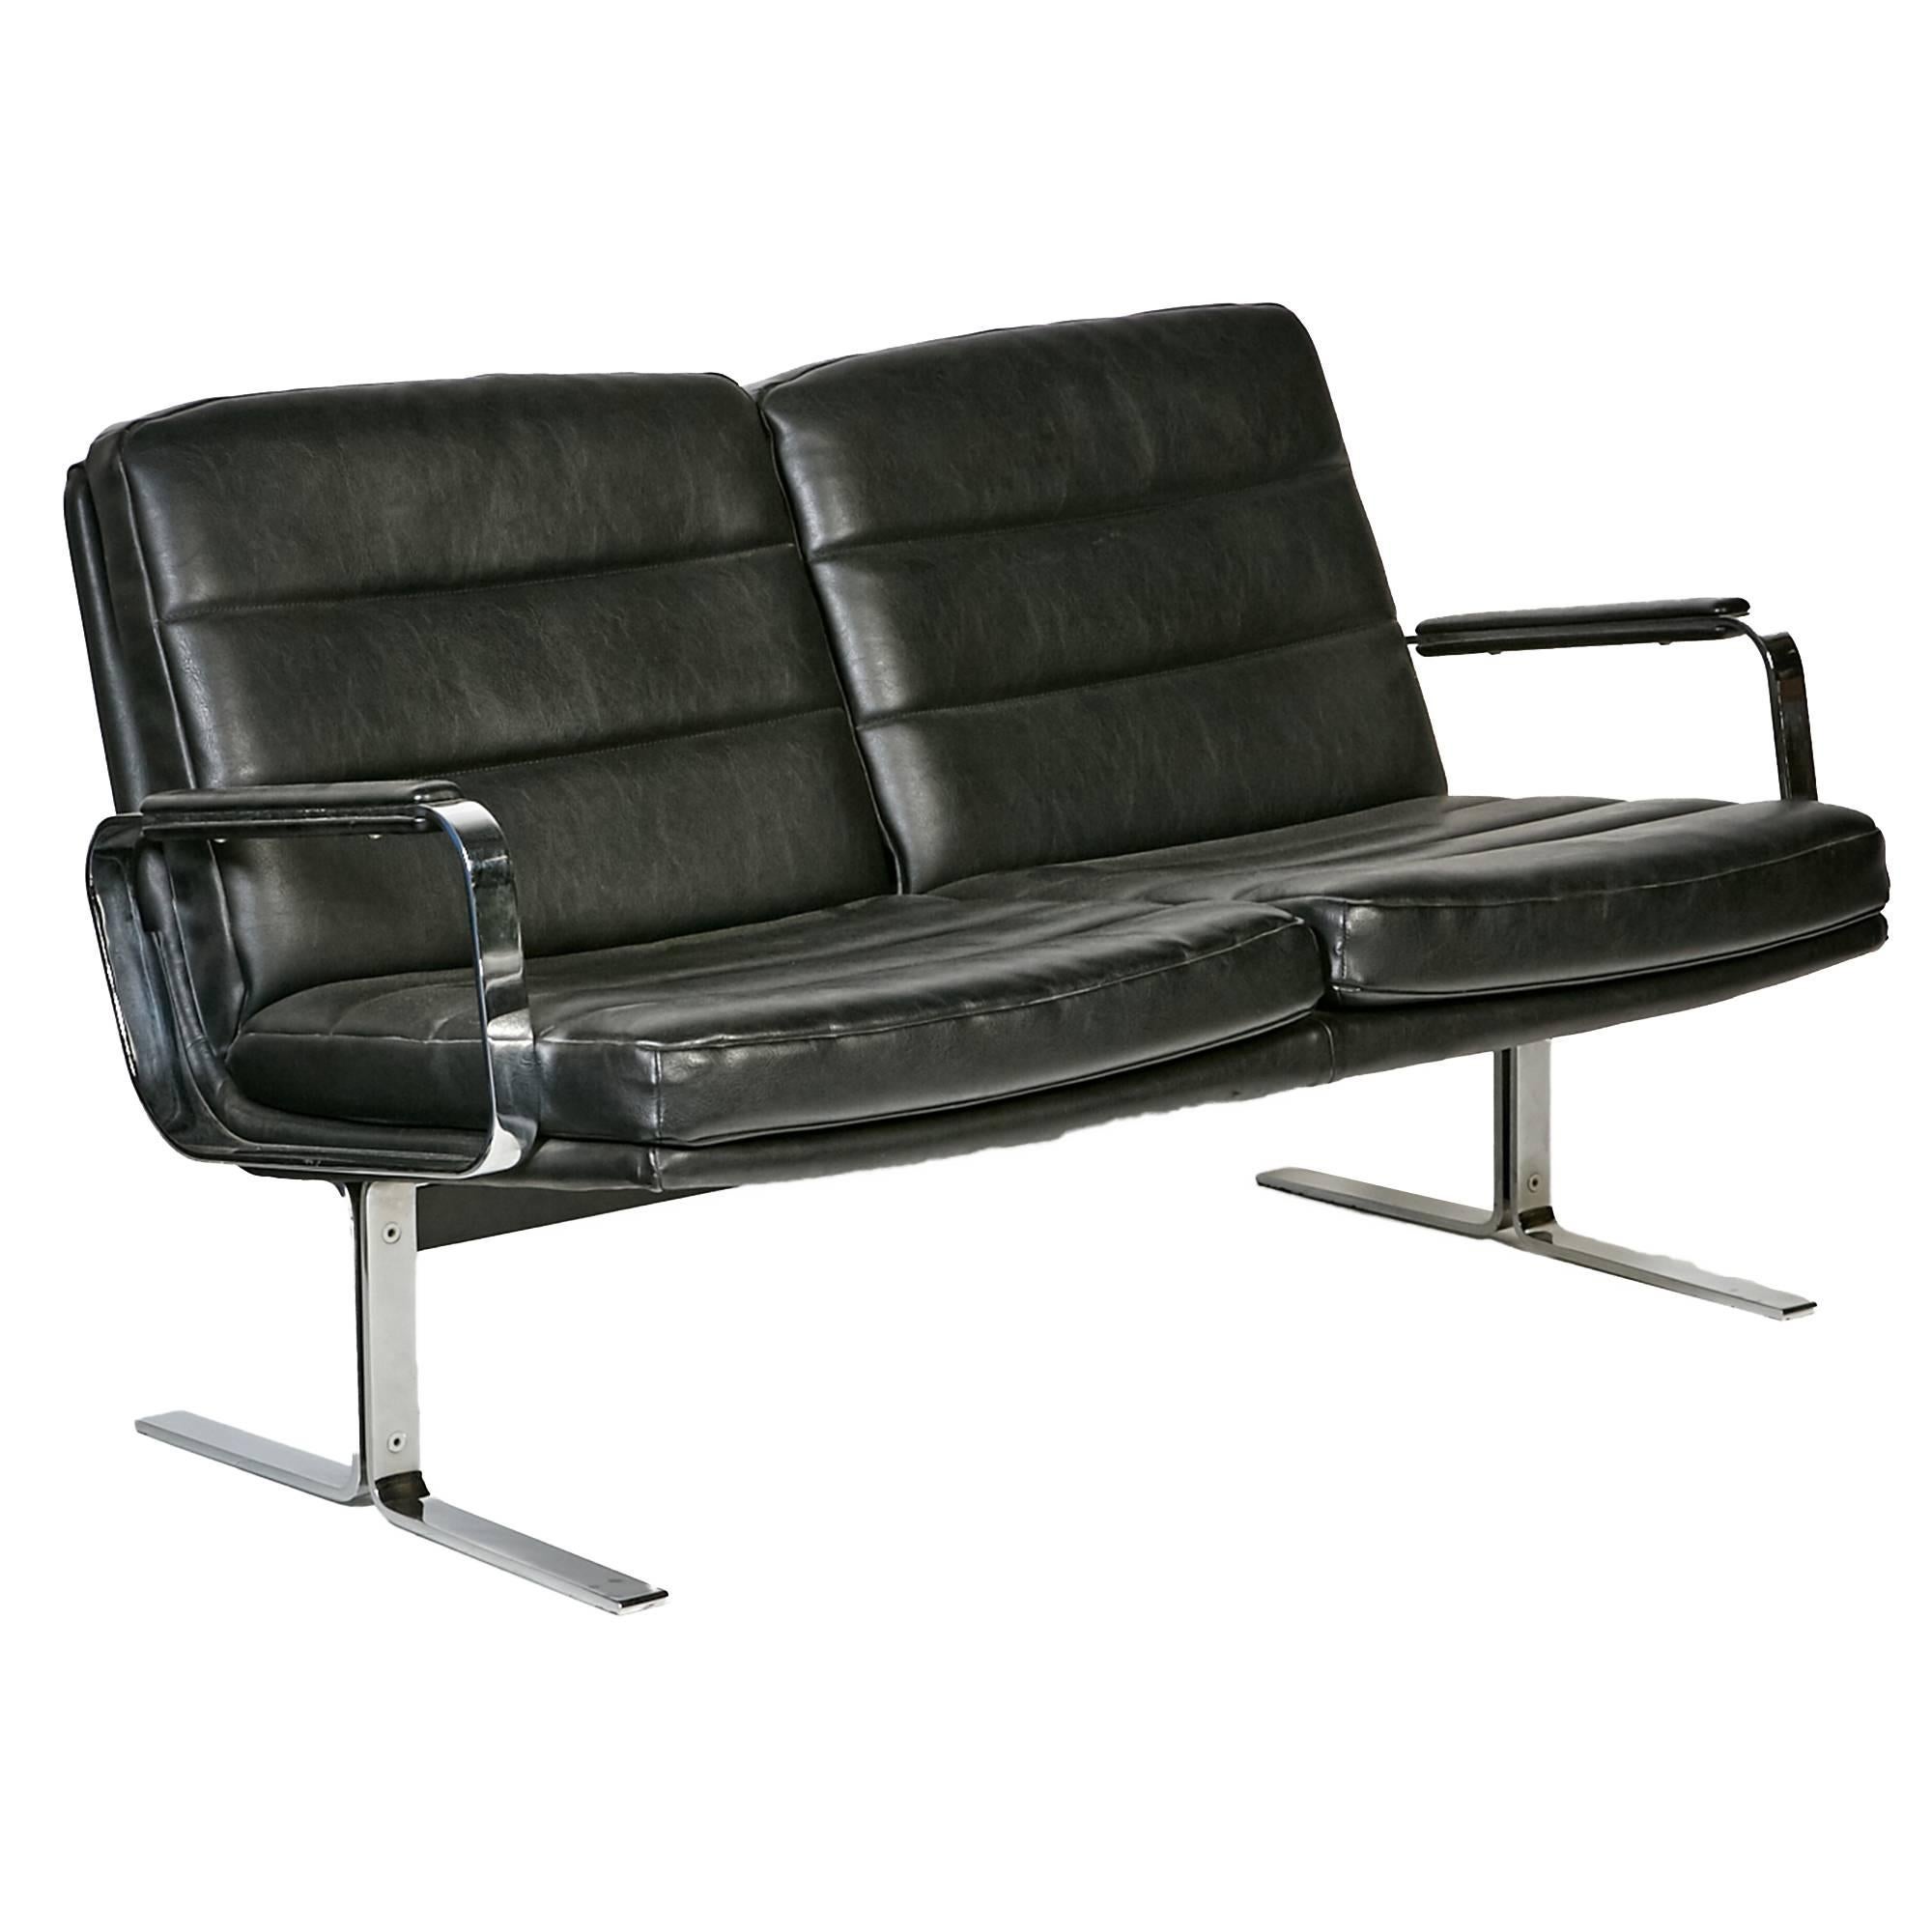 1970s black leather and flat-bar chrome airport-style living room/office set designed by Bernd Münzebrock for Knoll. The set includes a two-seat sofa, lounge chair and rosewood top coffee table. The sofa is 49.5" L x 24" W x 28.5" H,